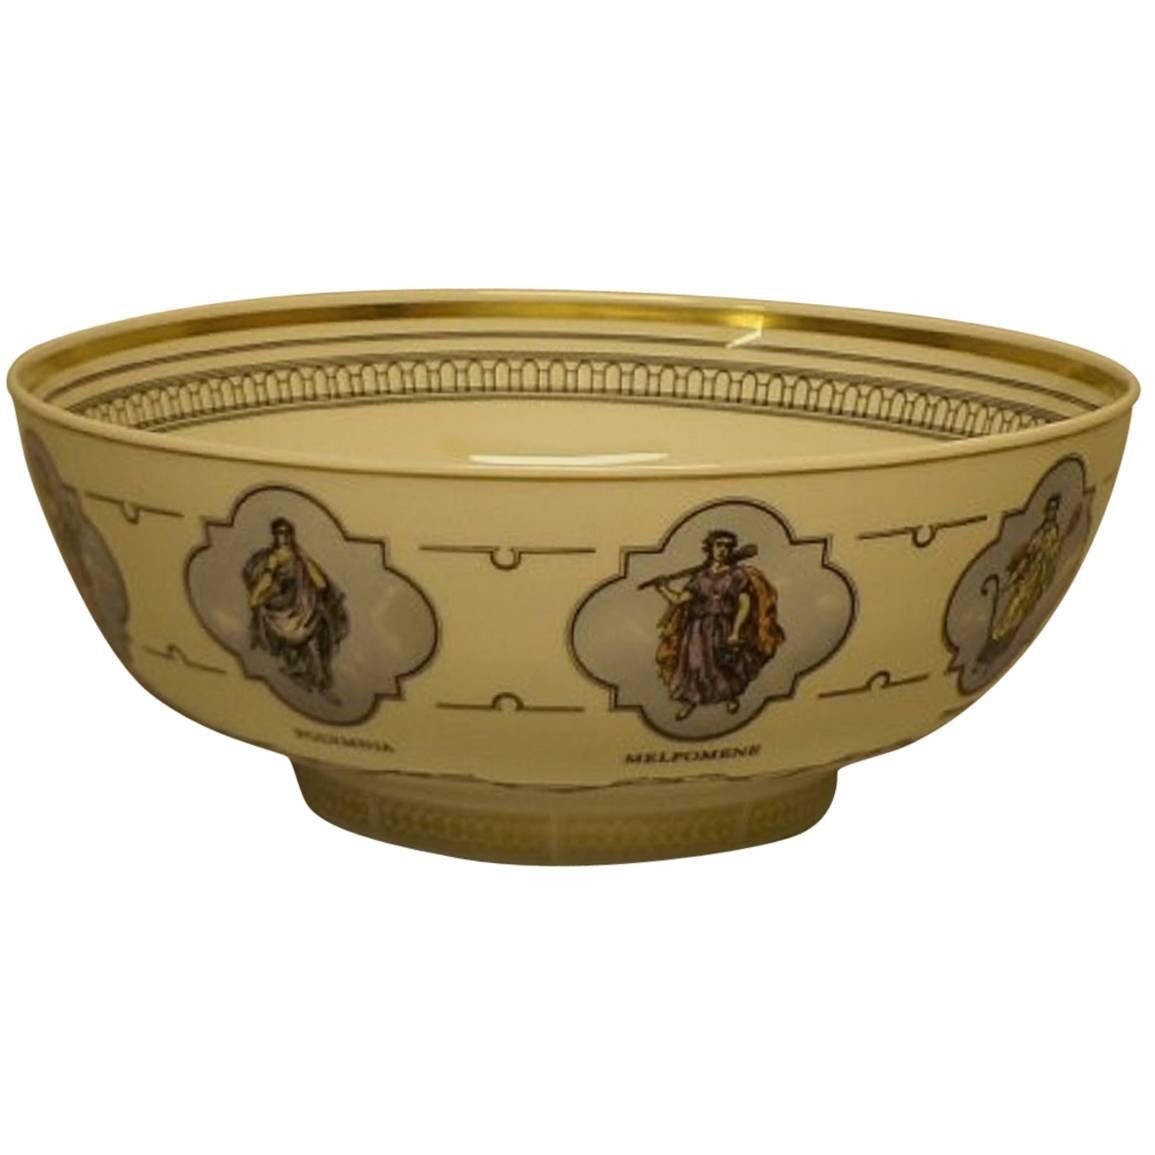 Rare B&G 'Bing & Gröndahl' Theatre Bowl, Limited Edition For Sale